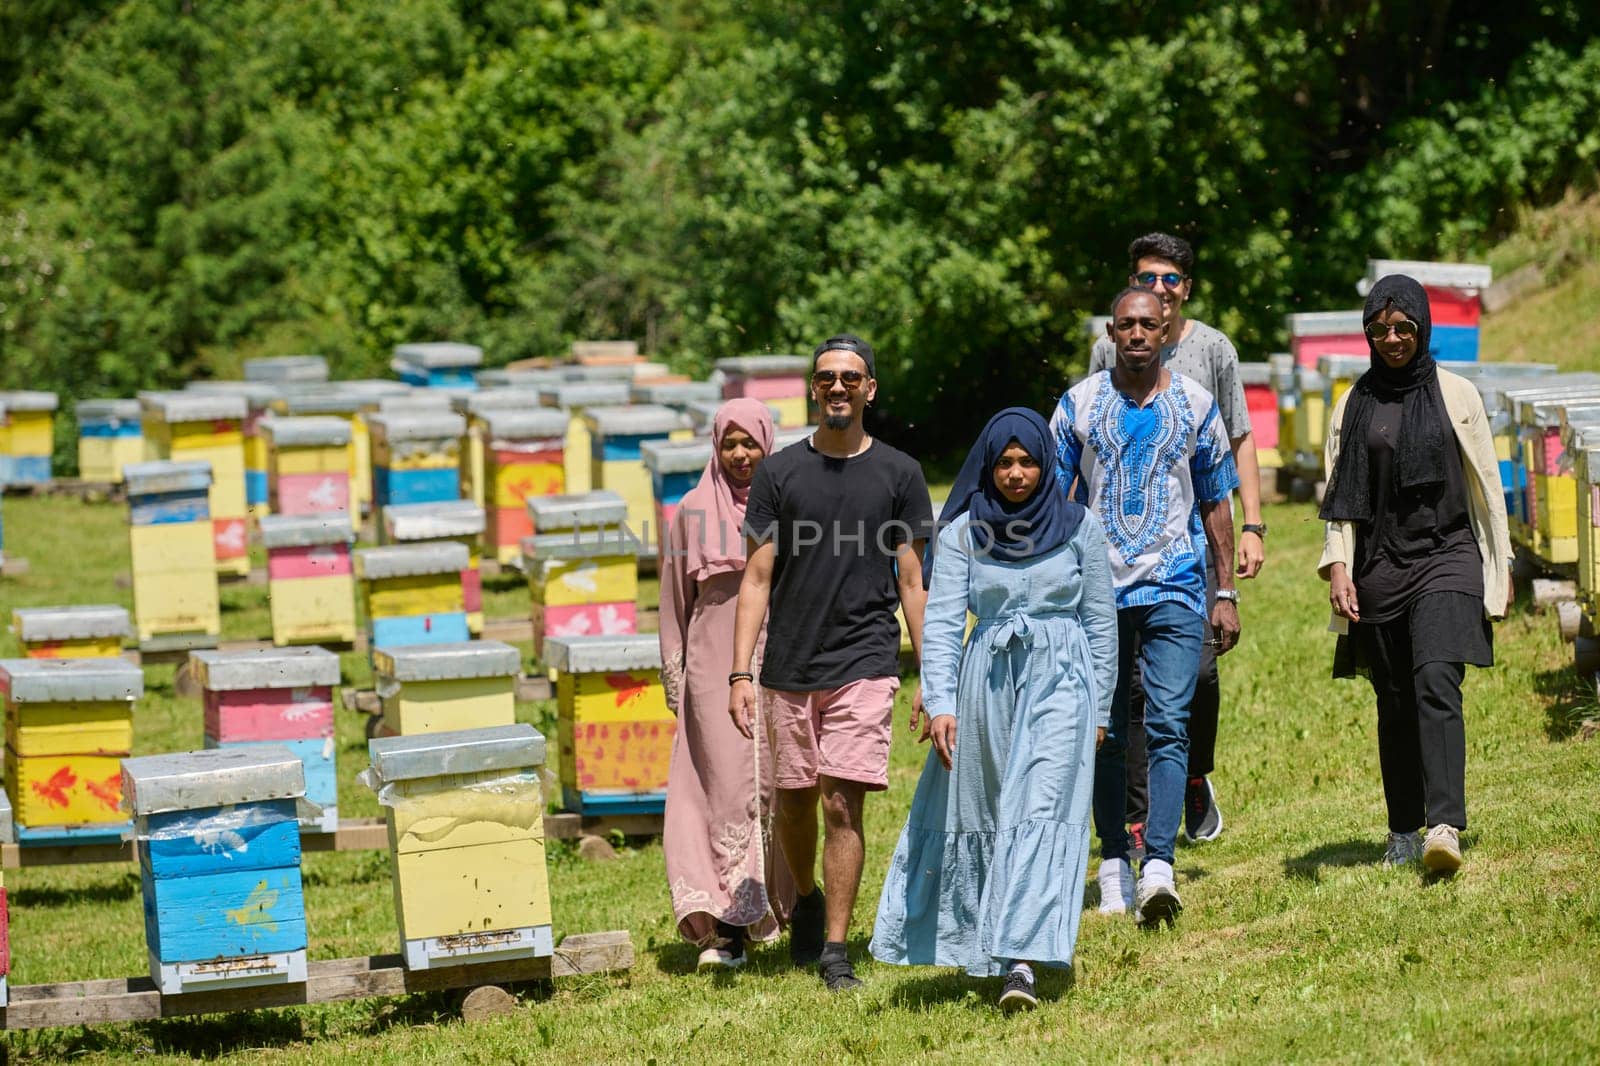 A diverse group of young friends and entrepreneurs explore small honey production businesses in the natural setting of the countryside. by dotshock